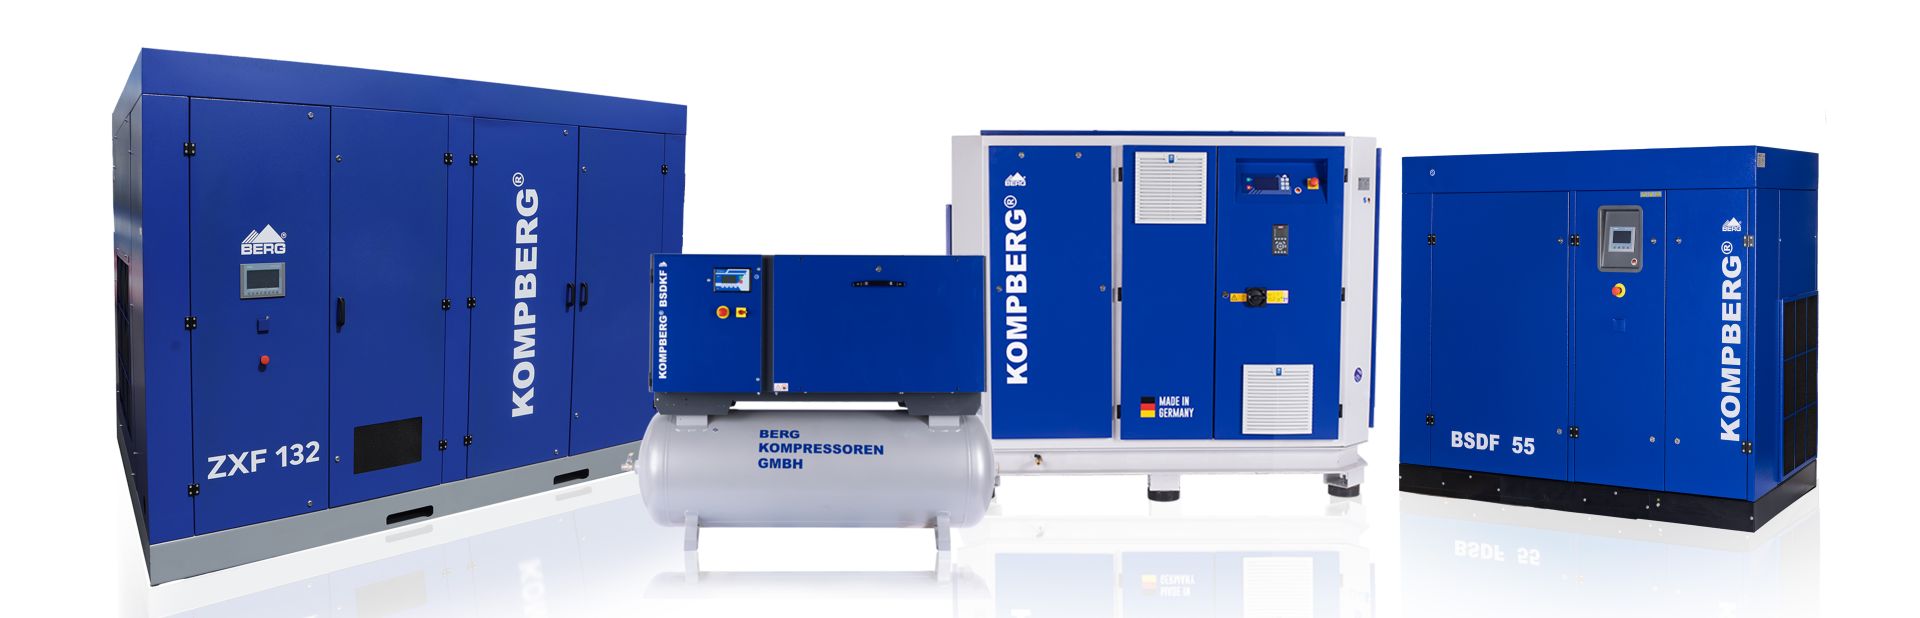 oil-free-and-oil-injected-compressors